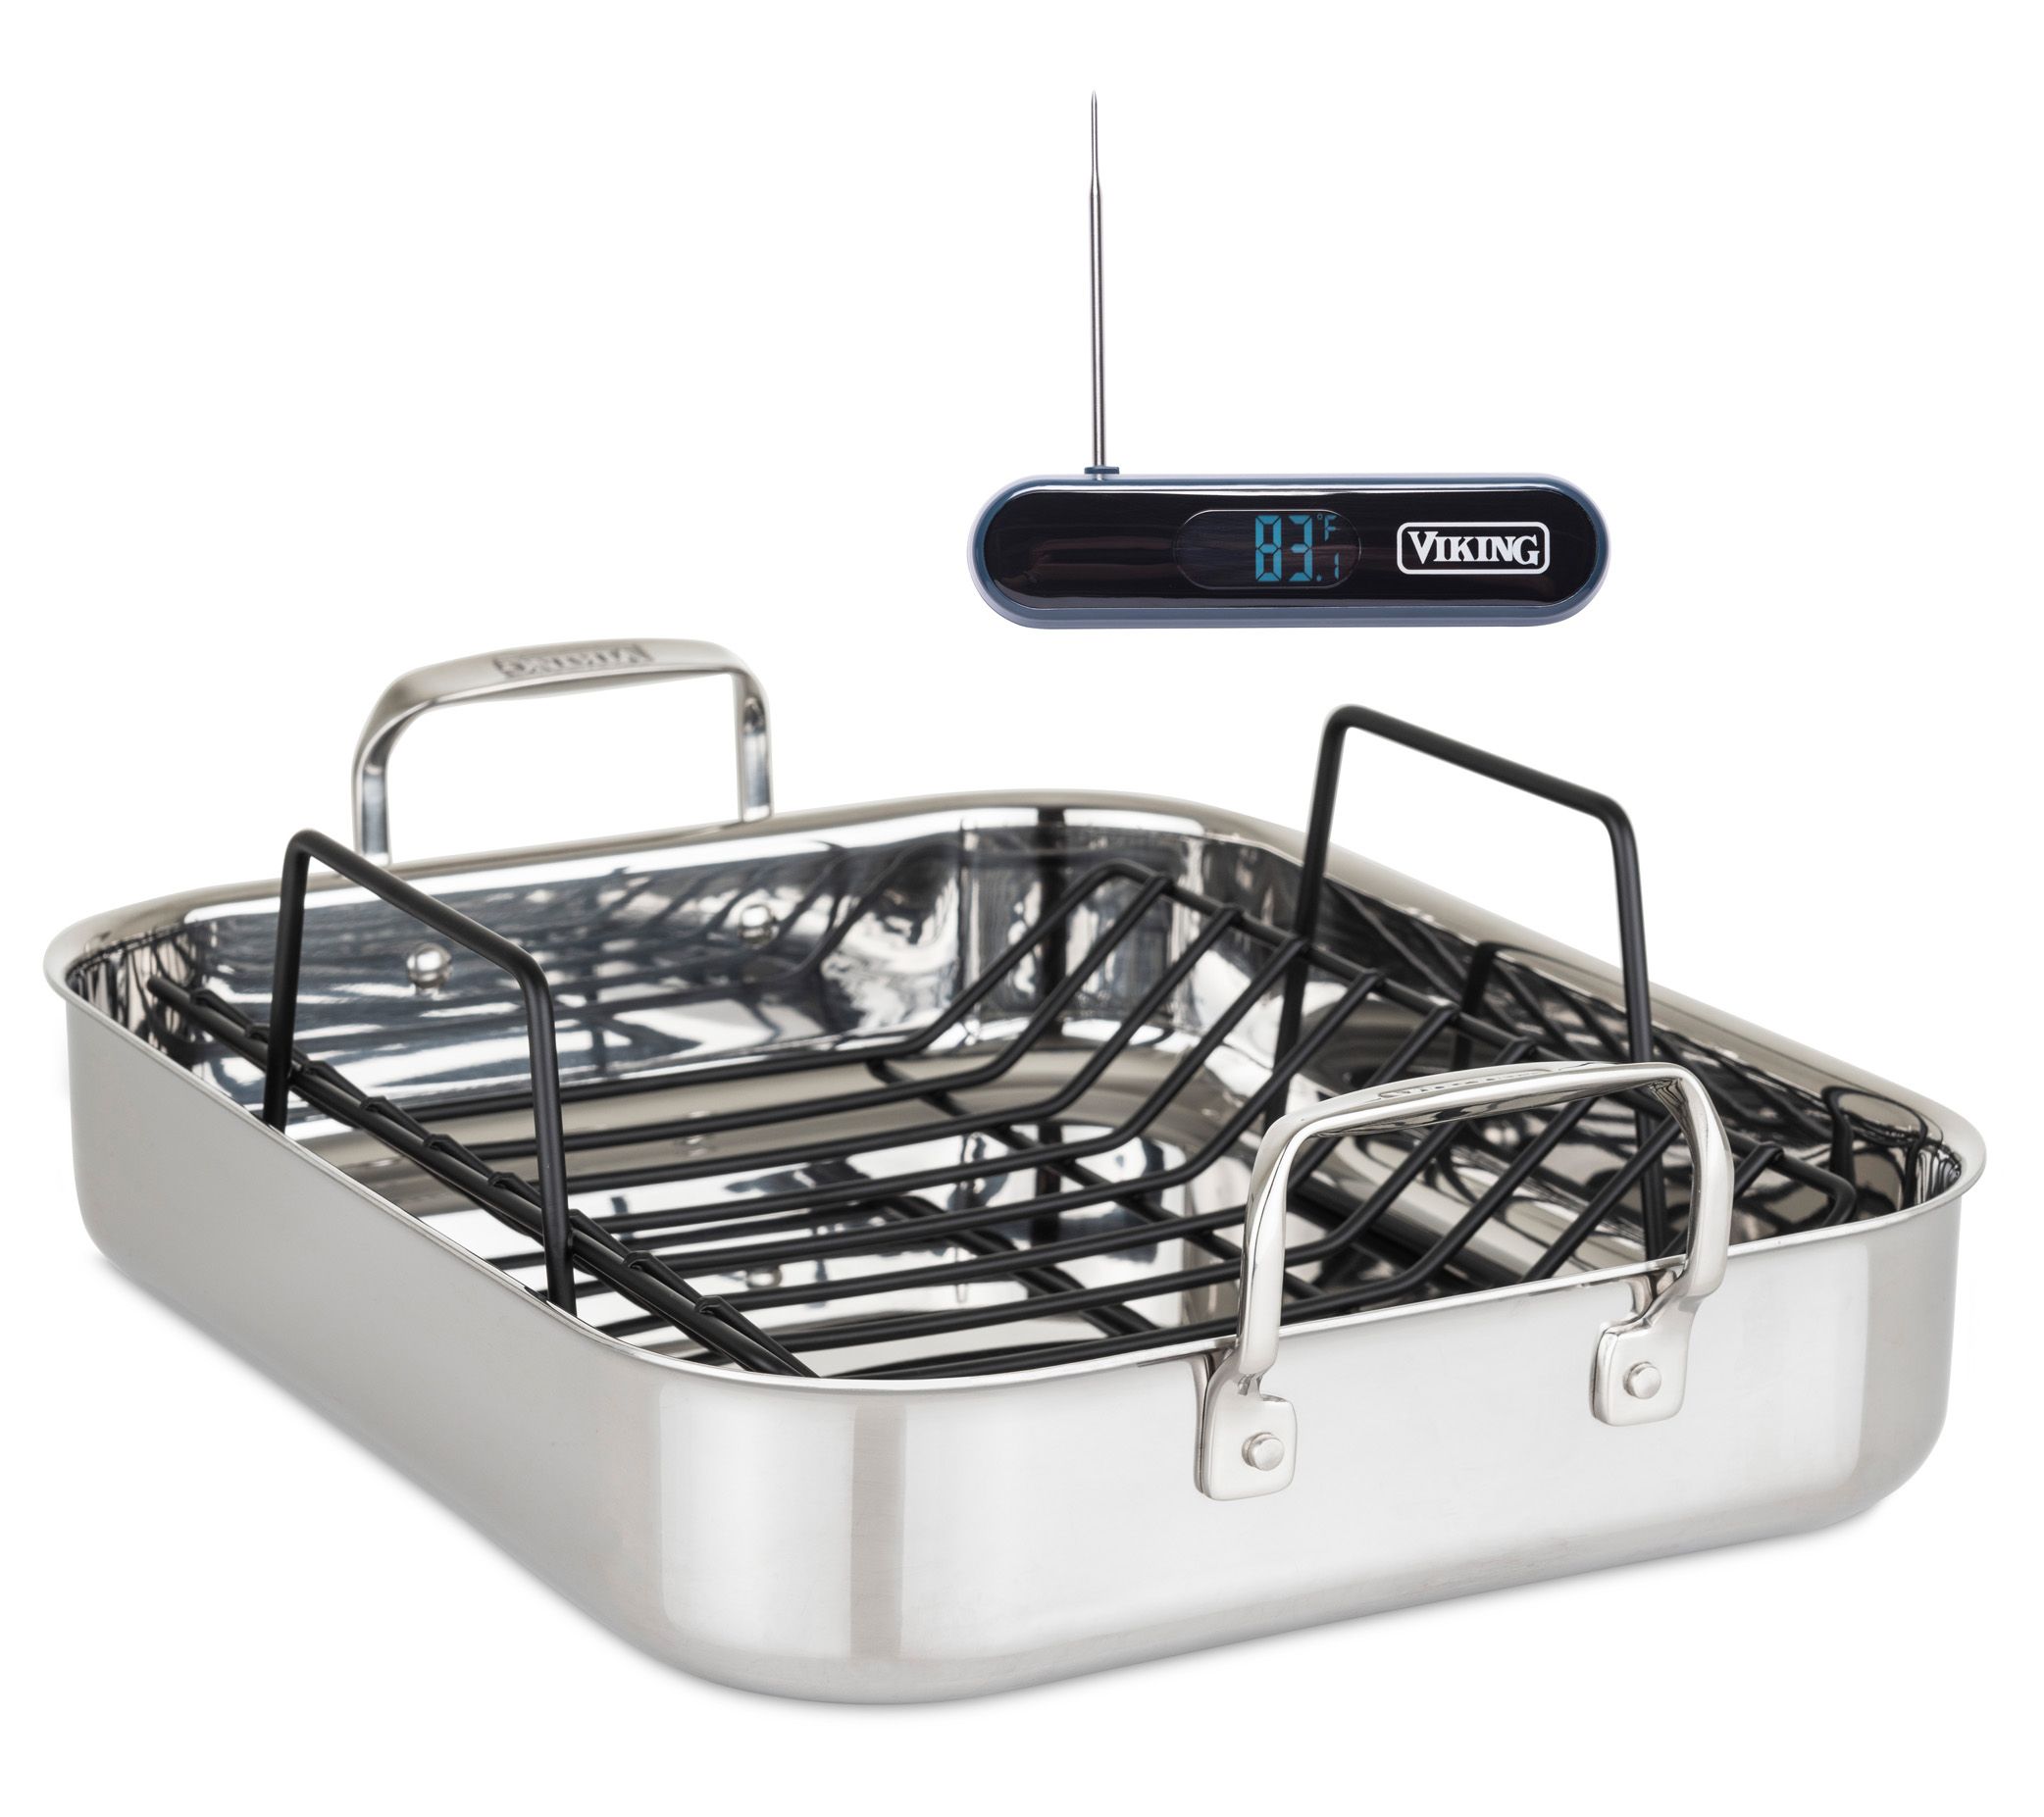 Nutrichef Oval Roasting Pan, Roaster with Polished Rack, Wide Handle and Stainless Steel Lid